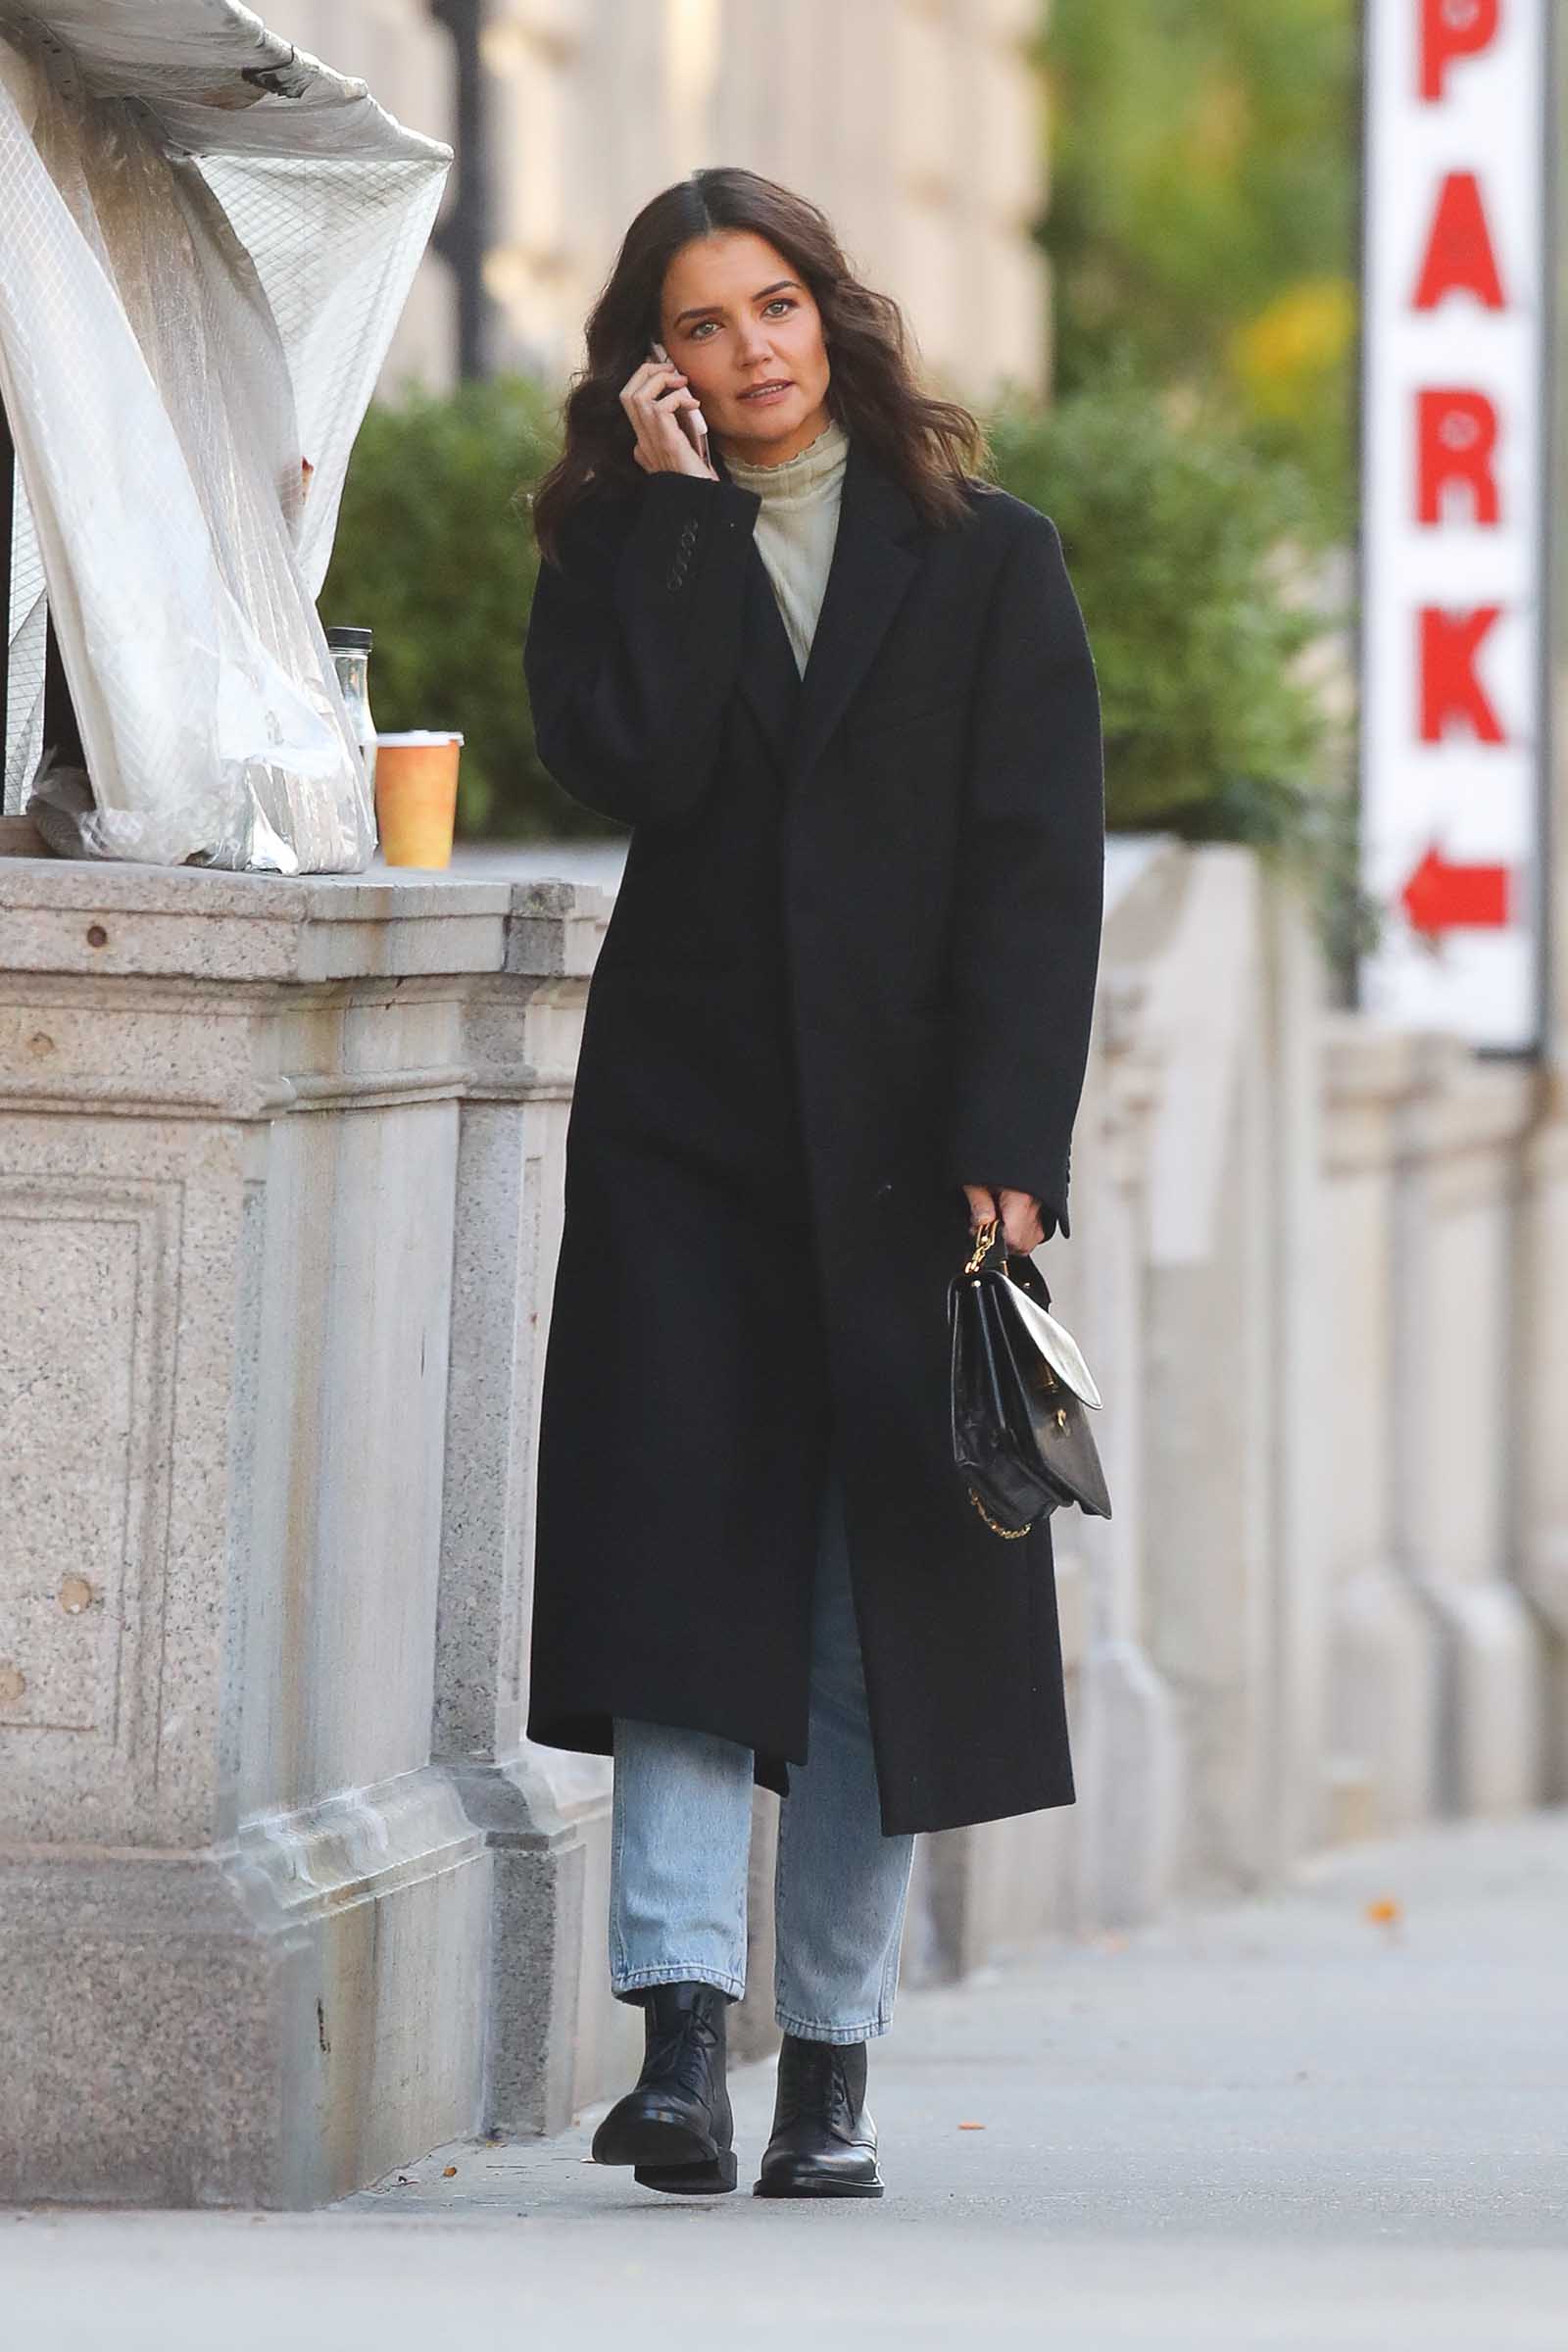 Katie Holmes steps out in a functional and stylish wool overcoat that we love!